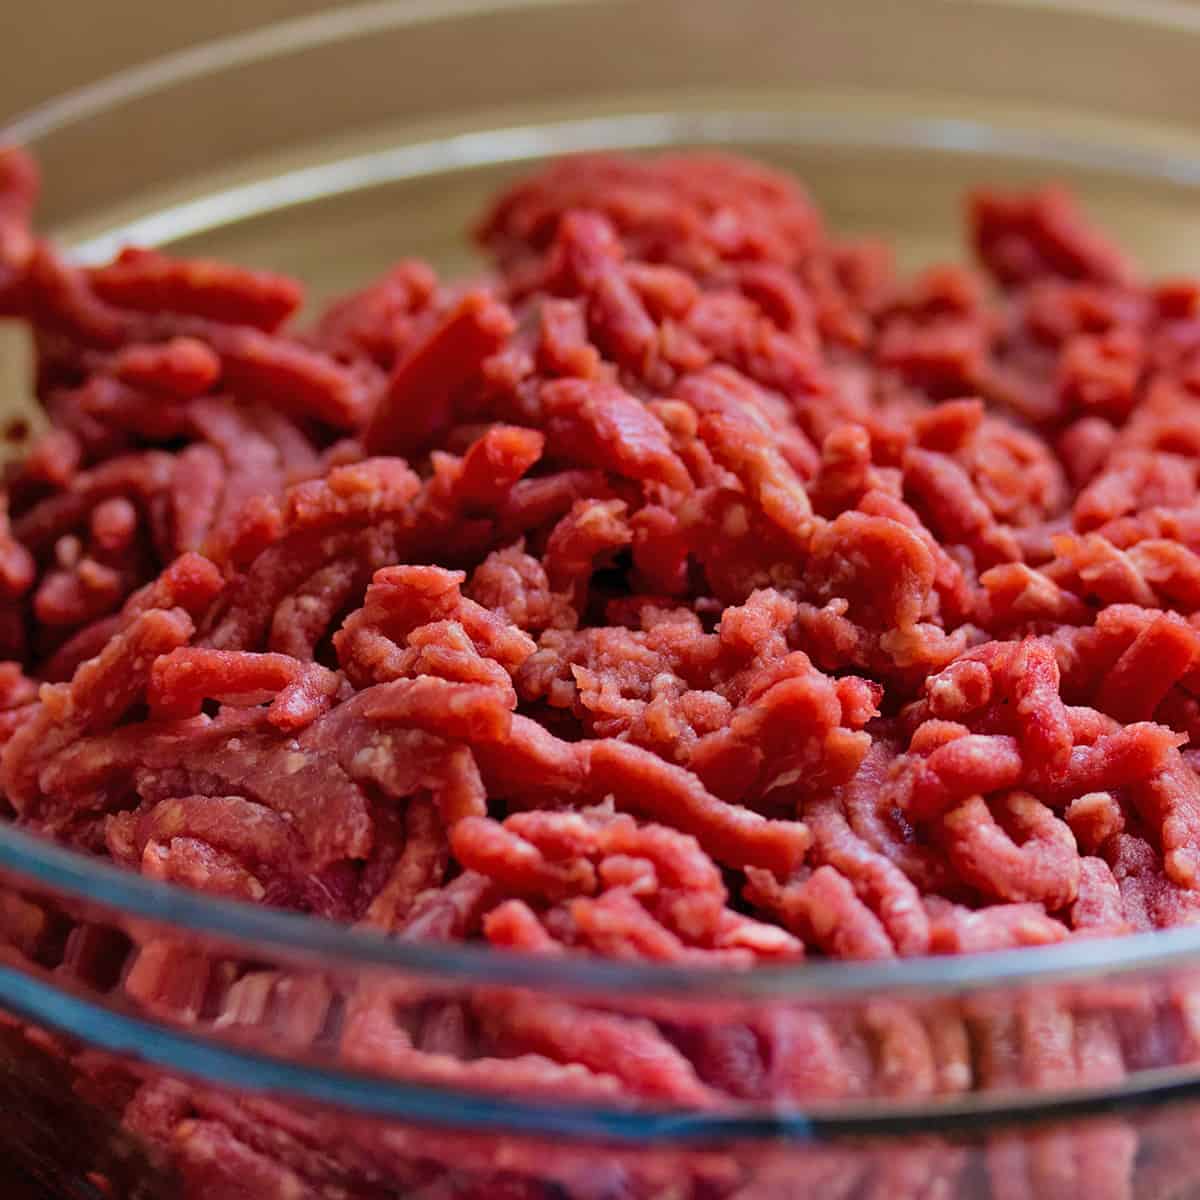 Bowl of ground beef aka minced meat or hamburger meat.